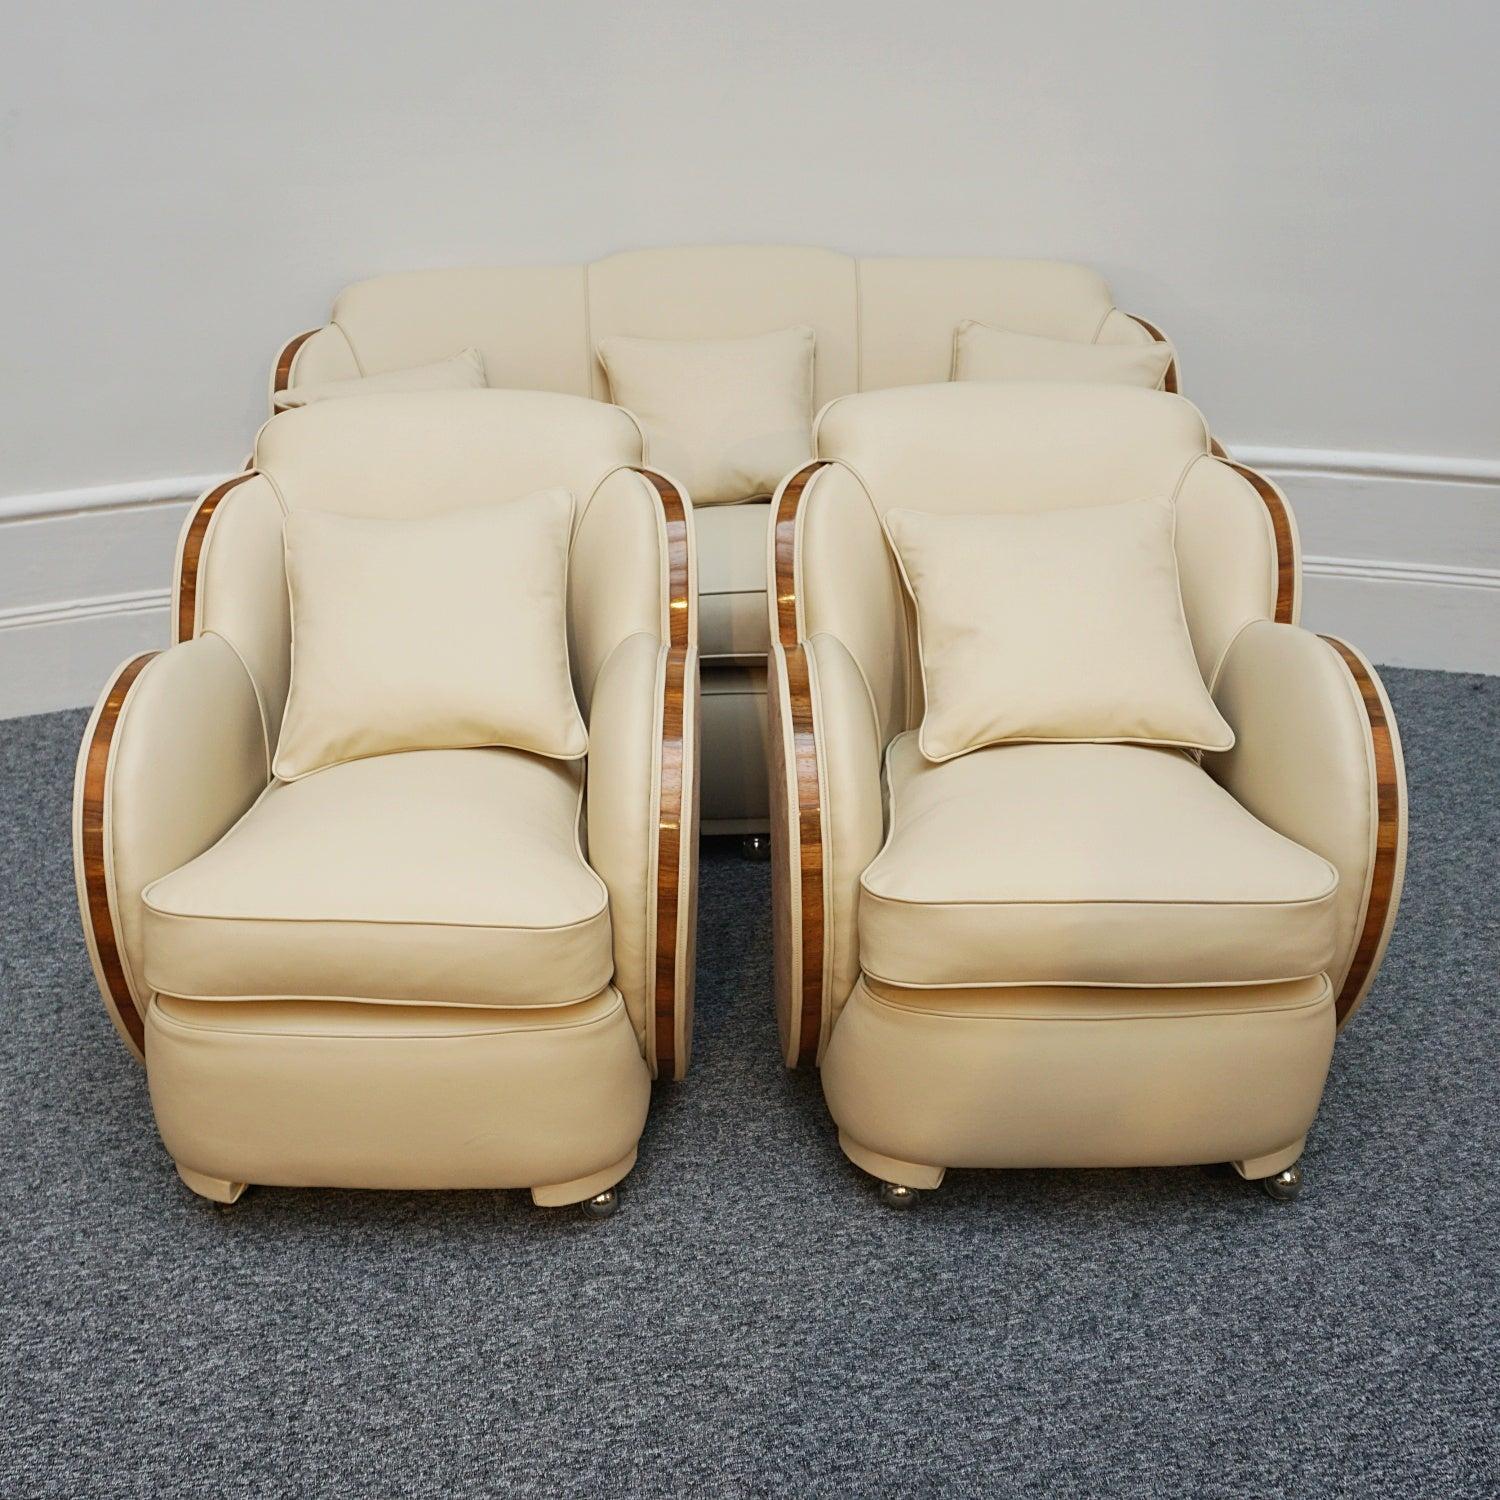 An Art Deco 'Cloud' three piece lounge suite by Harry & Lou Epstein. Three seater cloud back sofa and two armchairs. Figured walnut show wood banding. Re-upholstered in cream leather and contrasting faux suede. 

Dimensions: Sofa: H 84cm, W 167cm